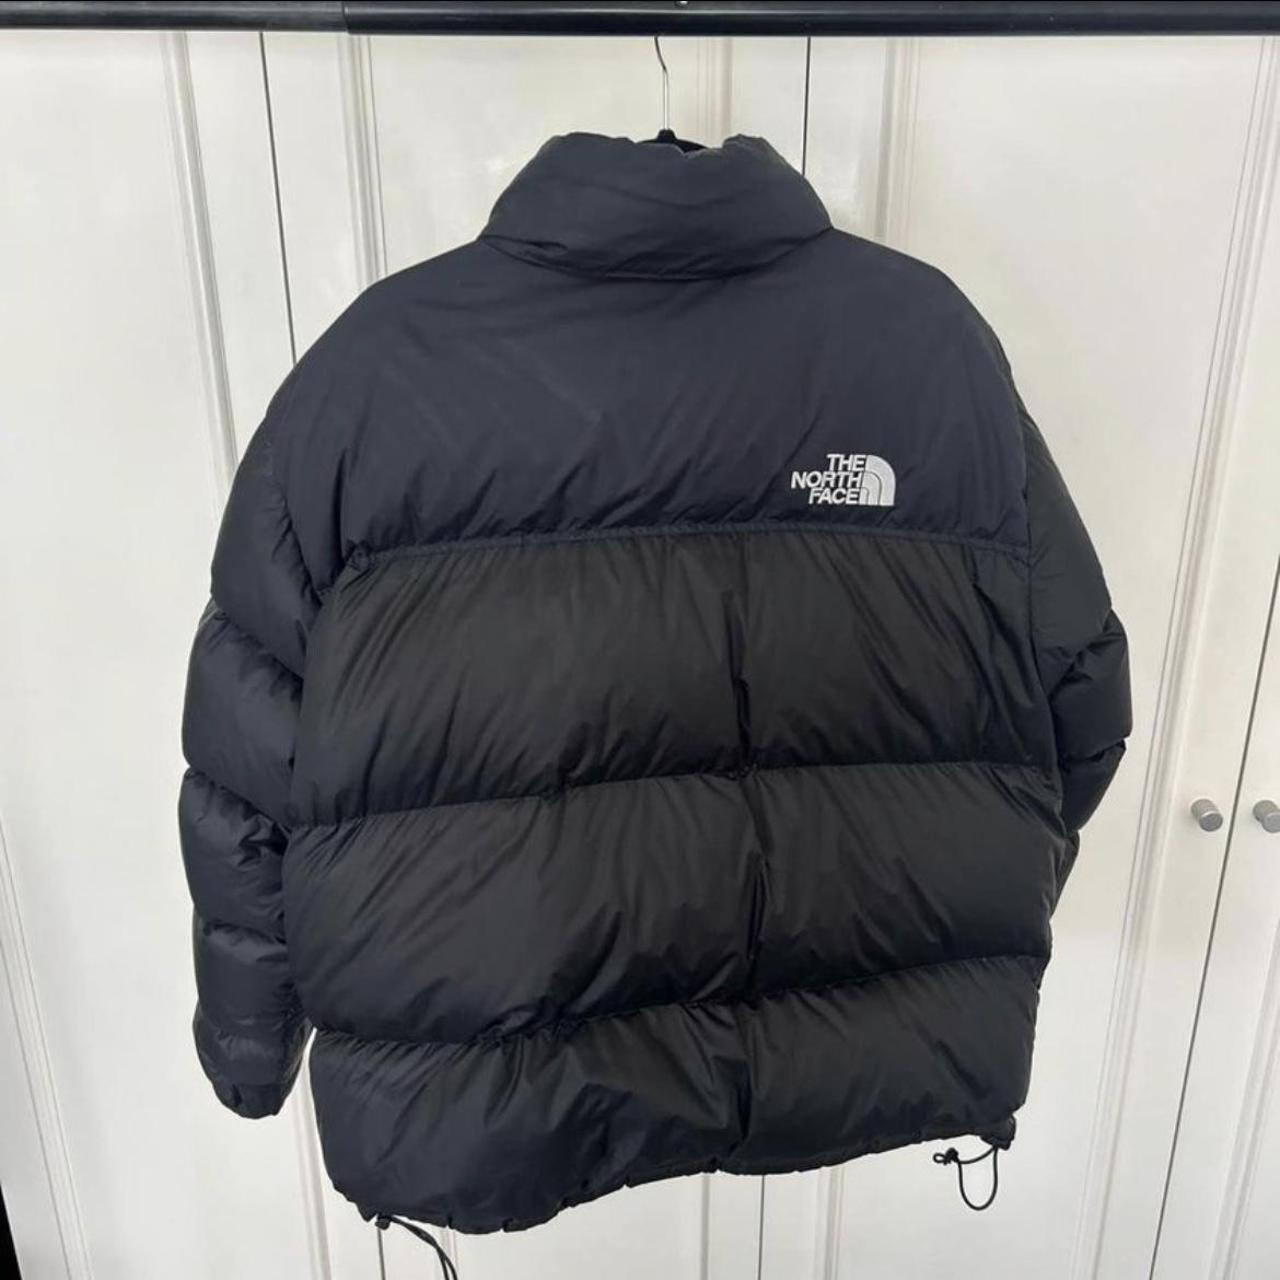 The North Face jacket in immaculate condition. Size... - Depop